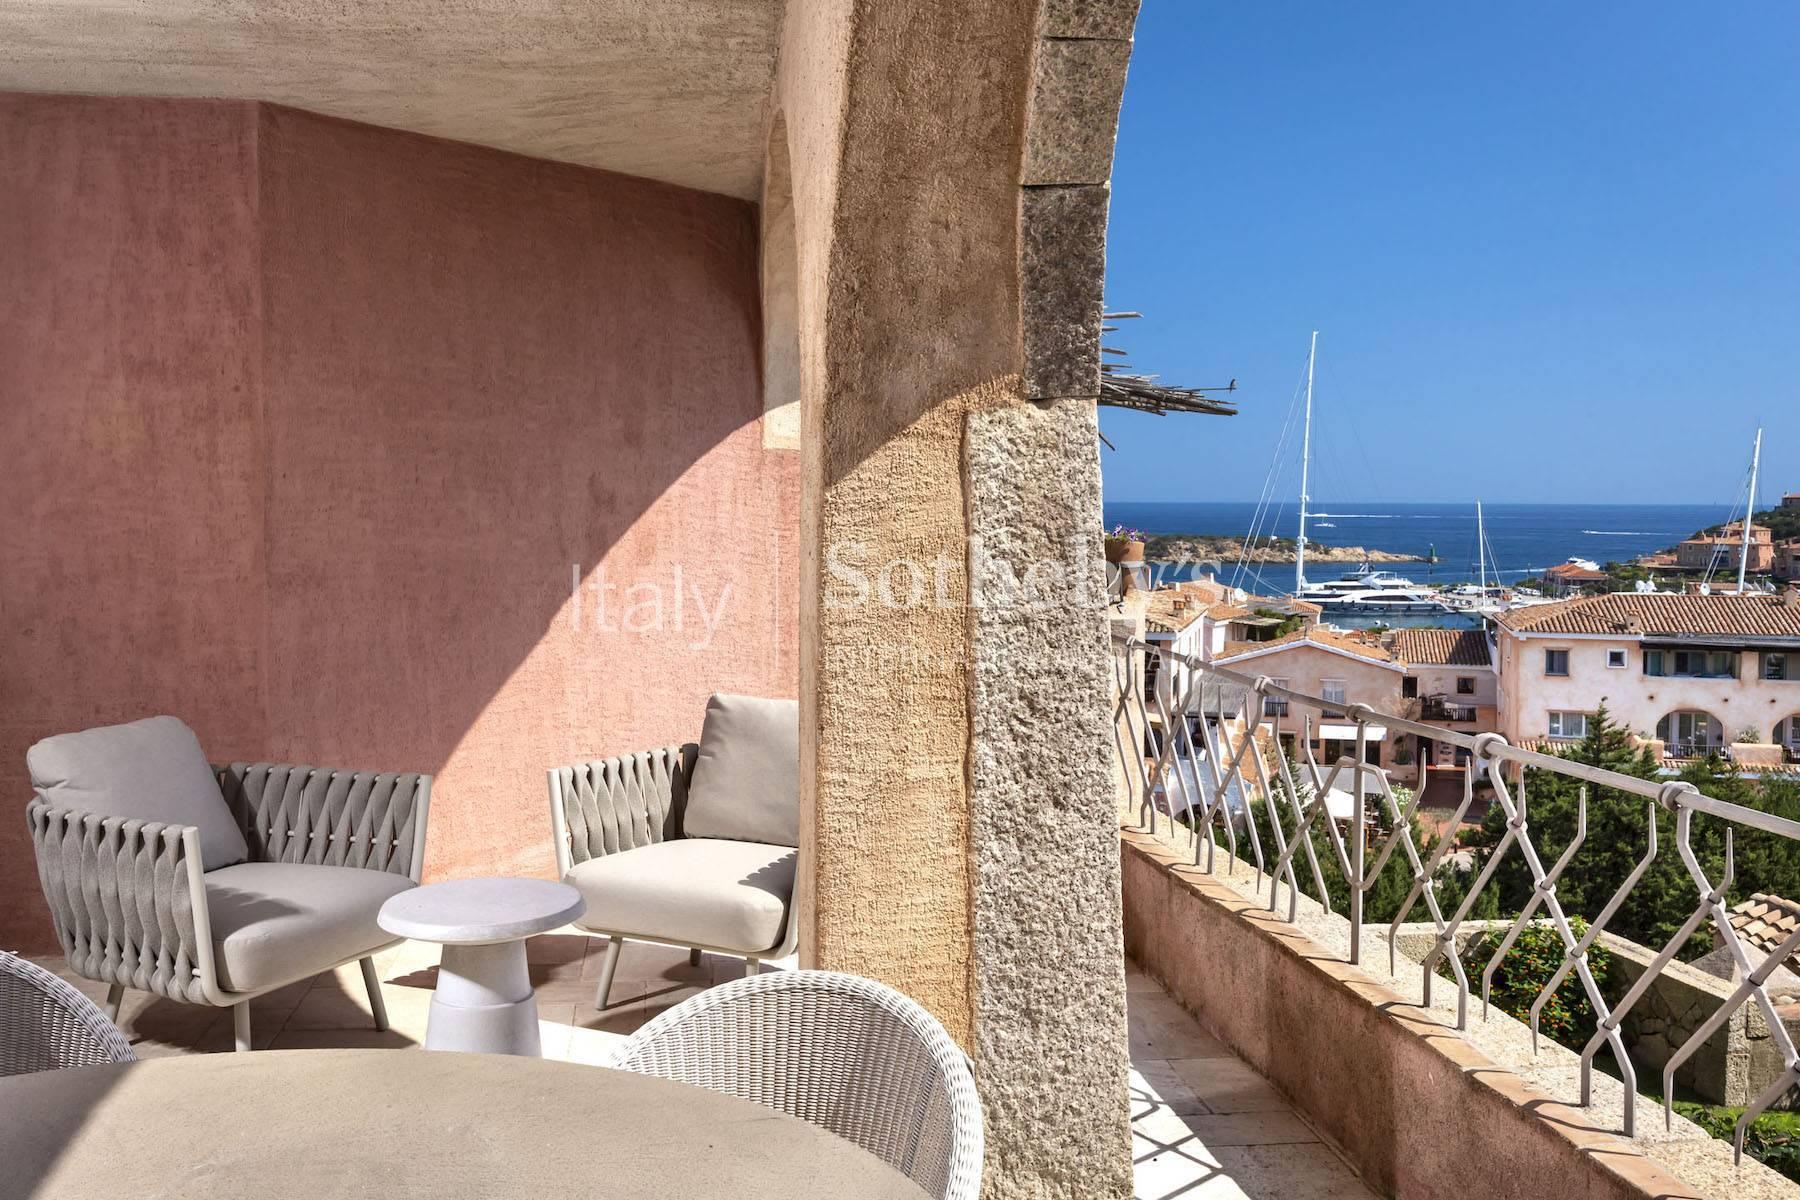 Elegantly furnished apartment with a picturesque view of the marina and the bay of Porto Cervo. - 7